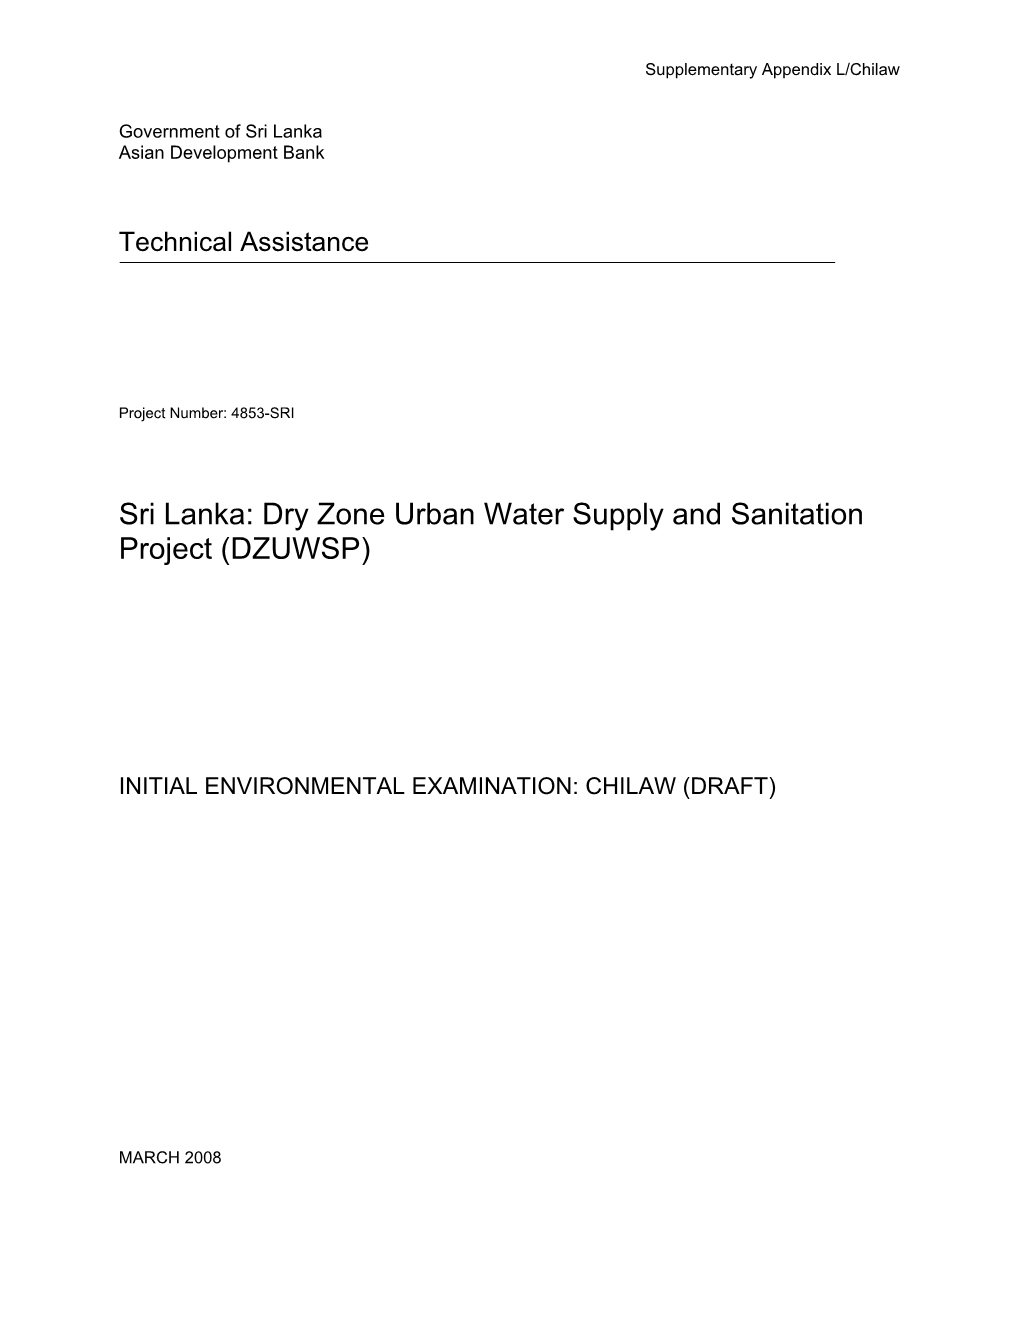 Dry Zone Urban Water Supply and Sanitation Project (DZUWSP)